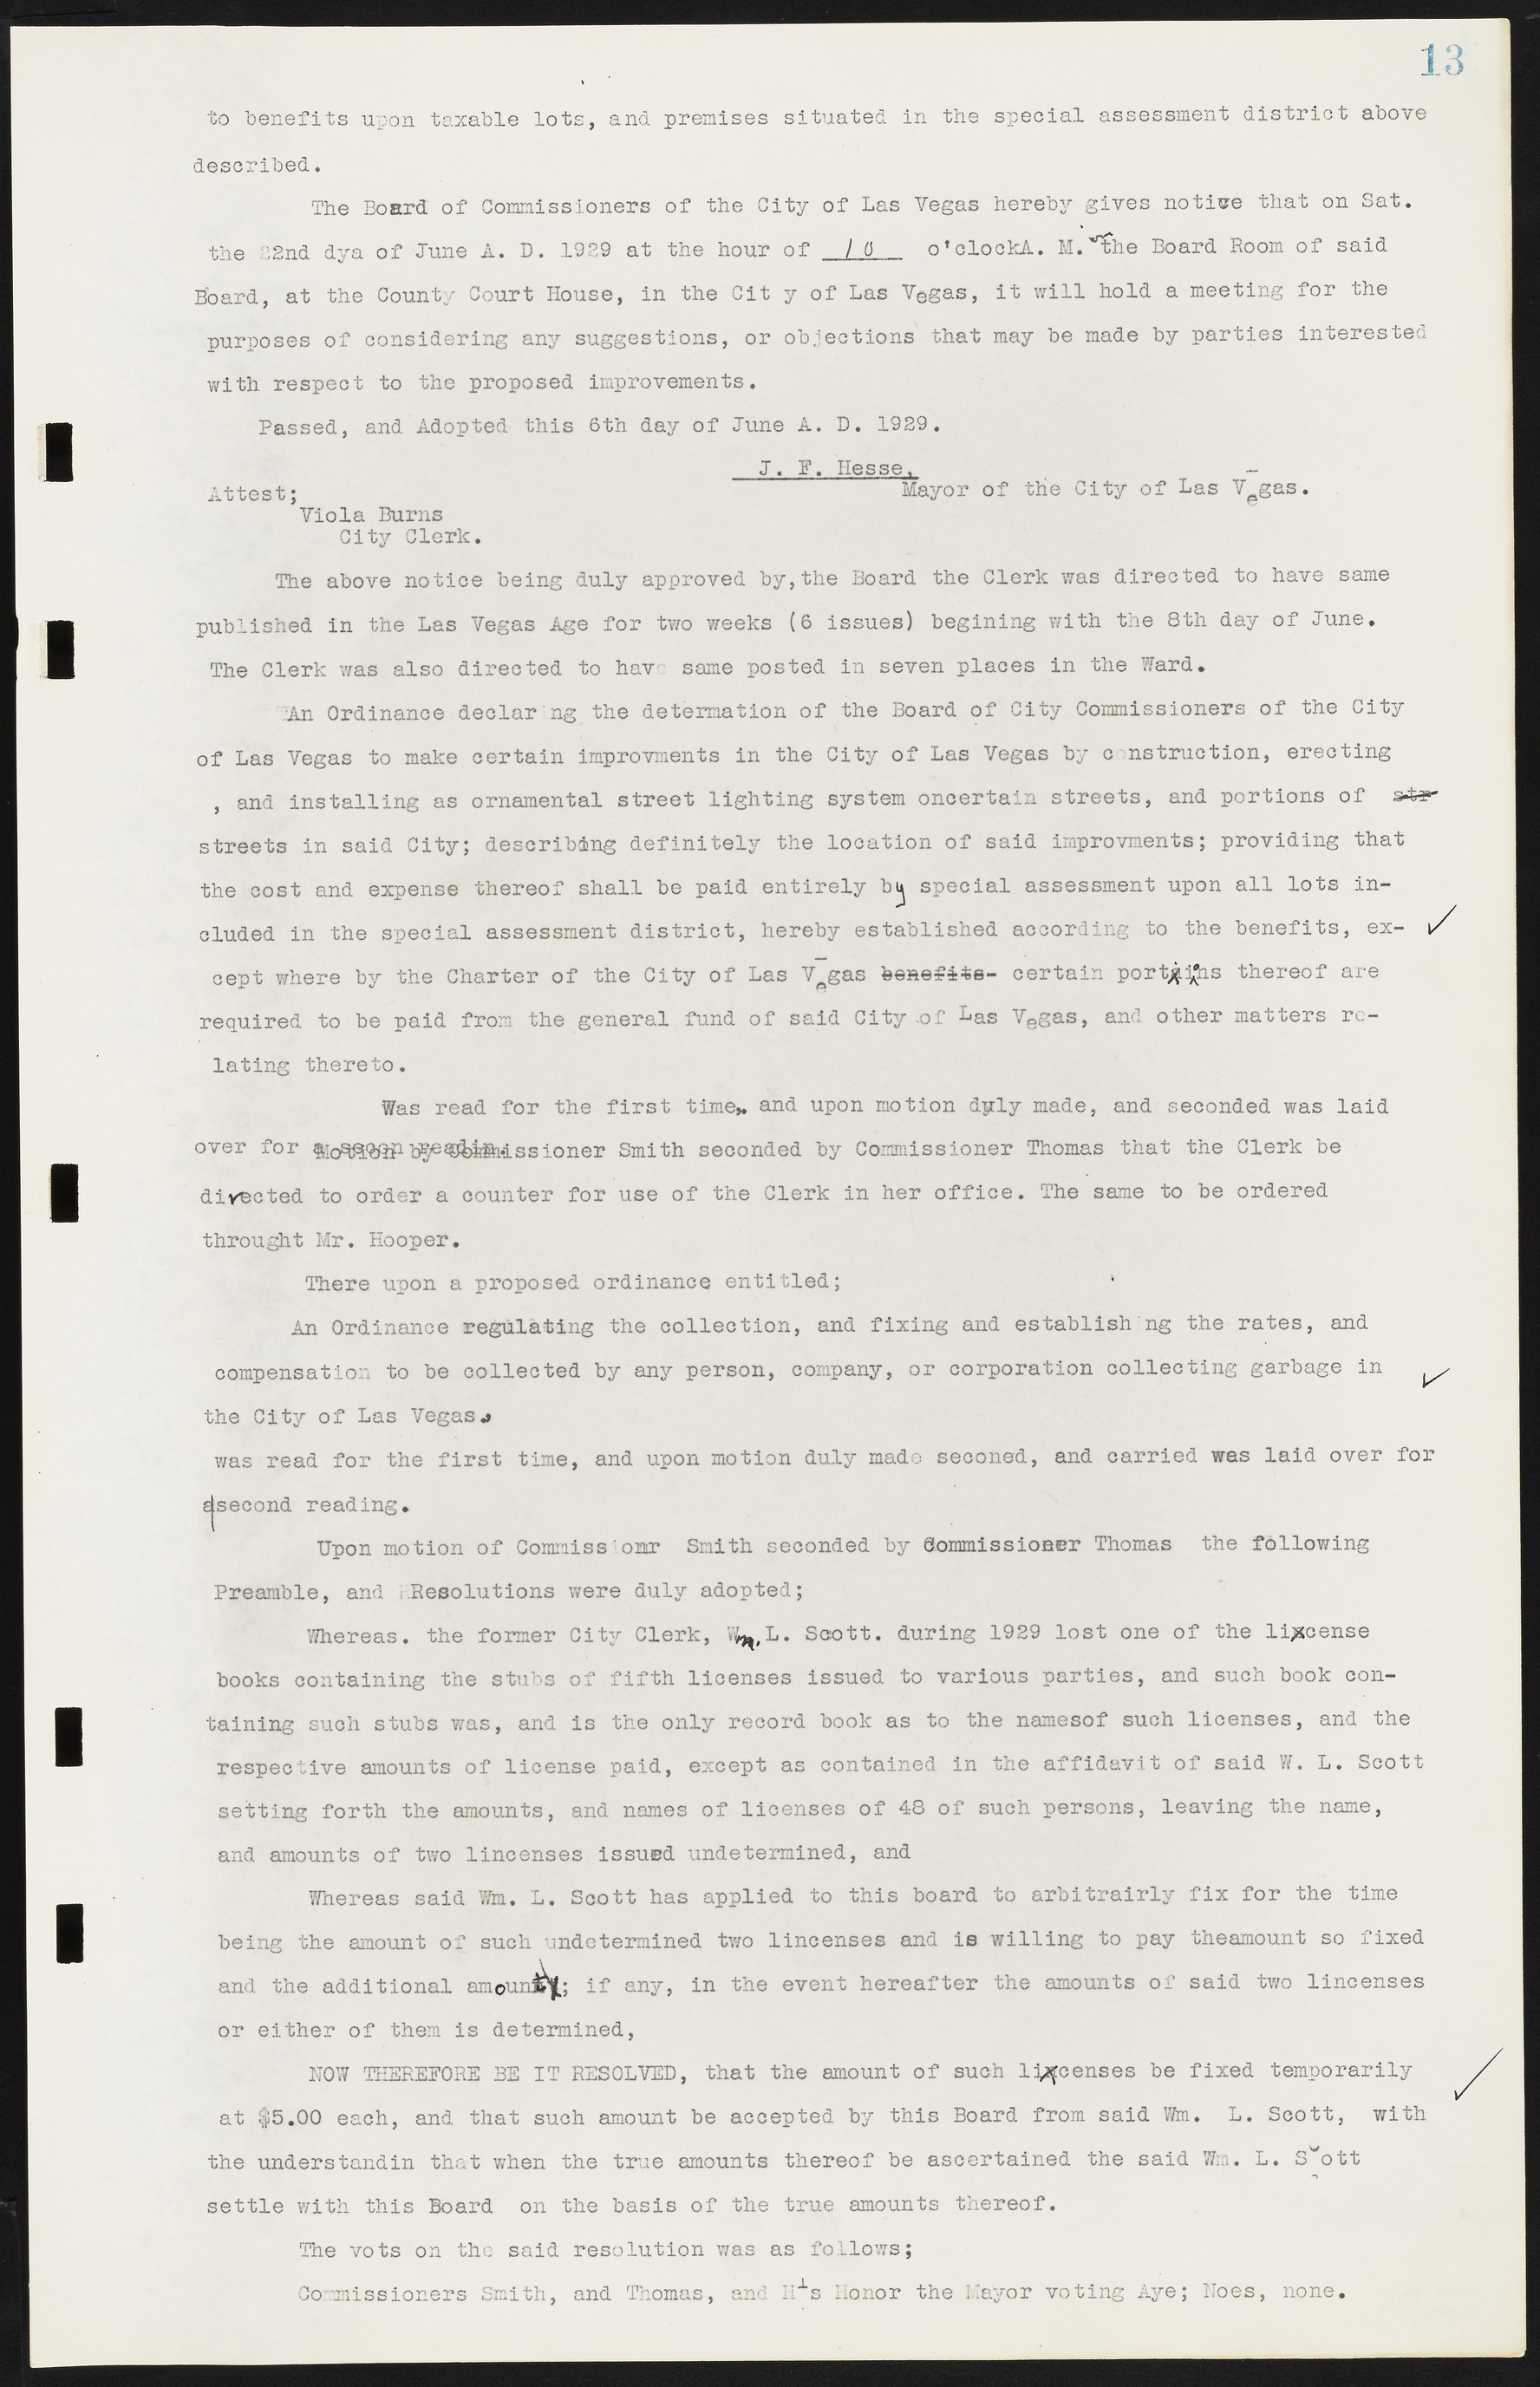 Las Vegas City Commission Minutes, May 14, 1929 to February 11, 1937, lvc000003-19